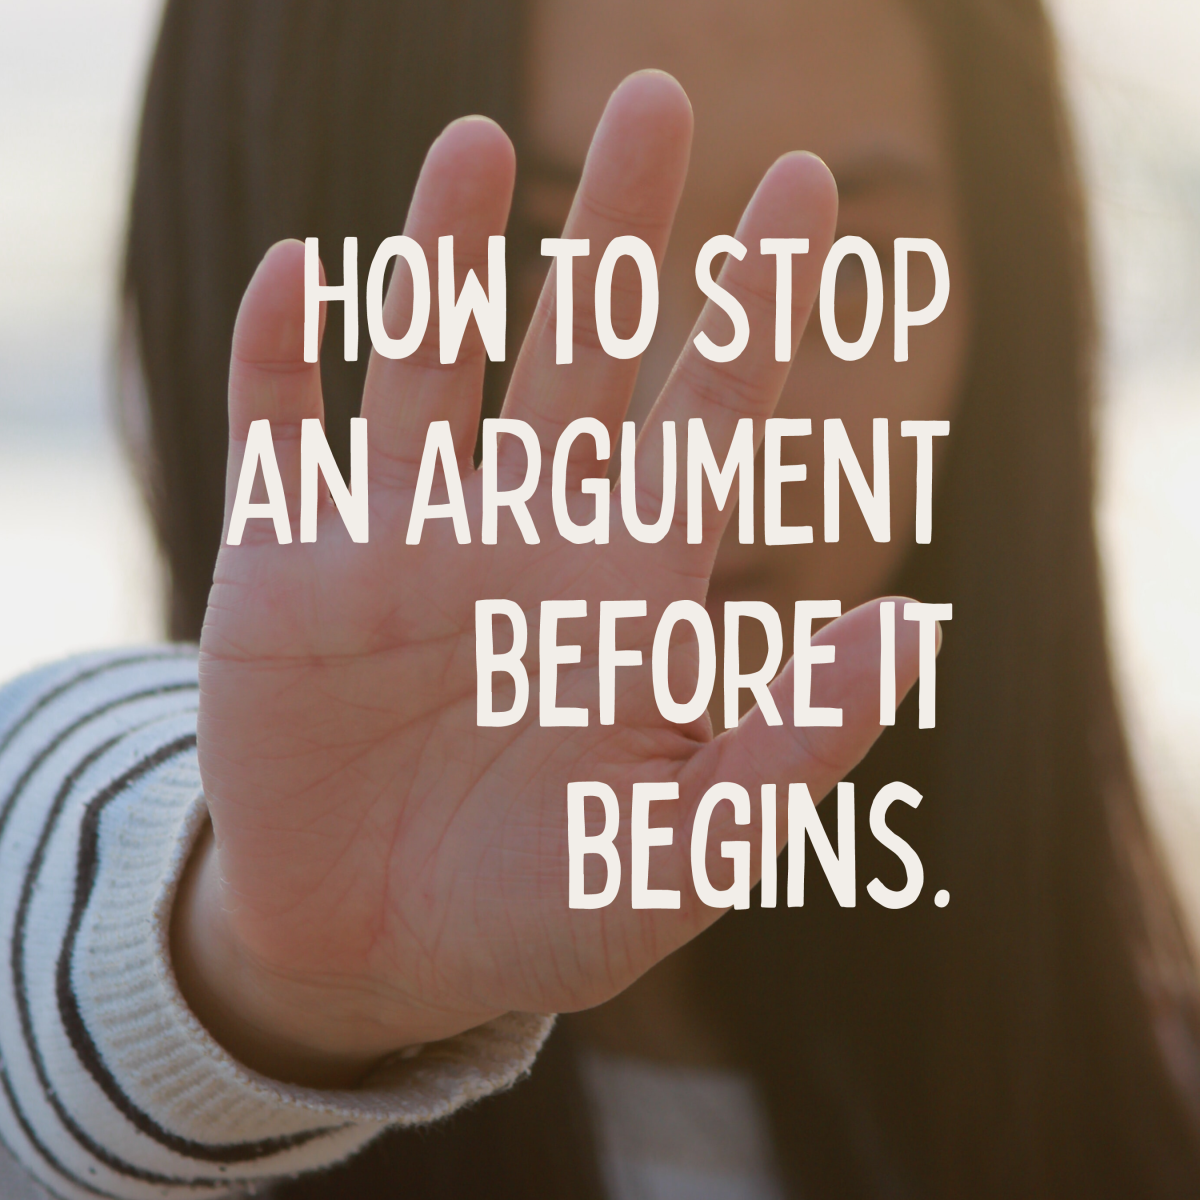 How to Stop an Argument or a Fight With Simple Words and Phrases